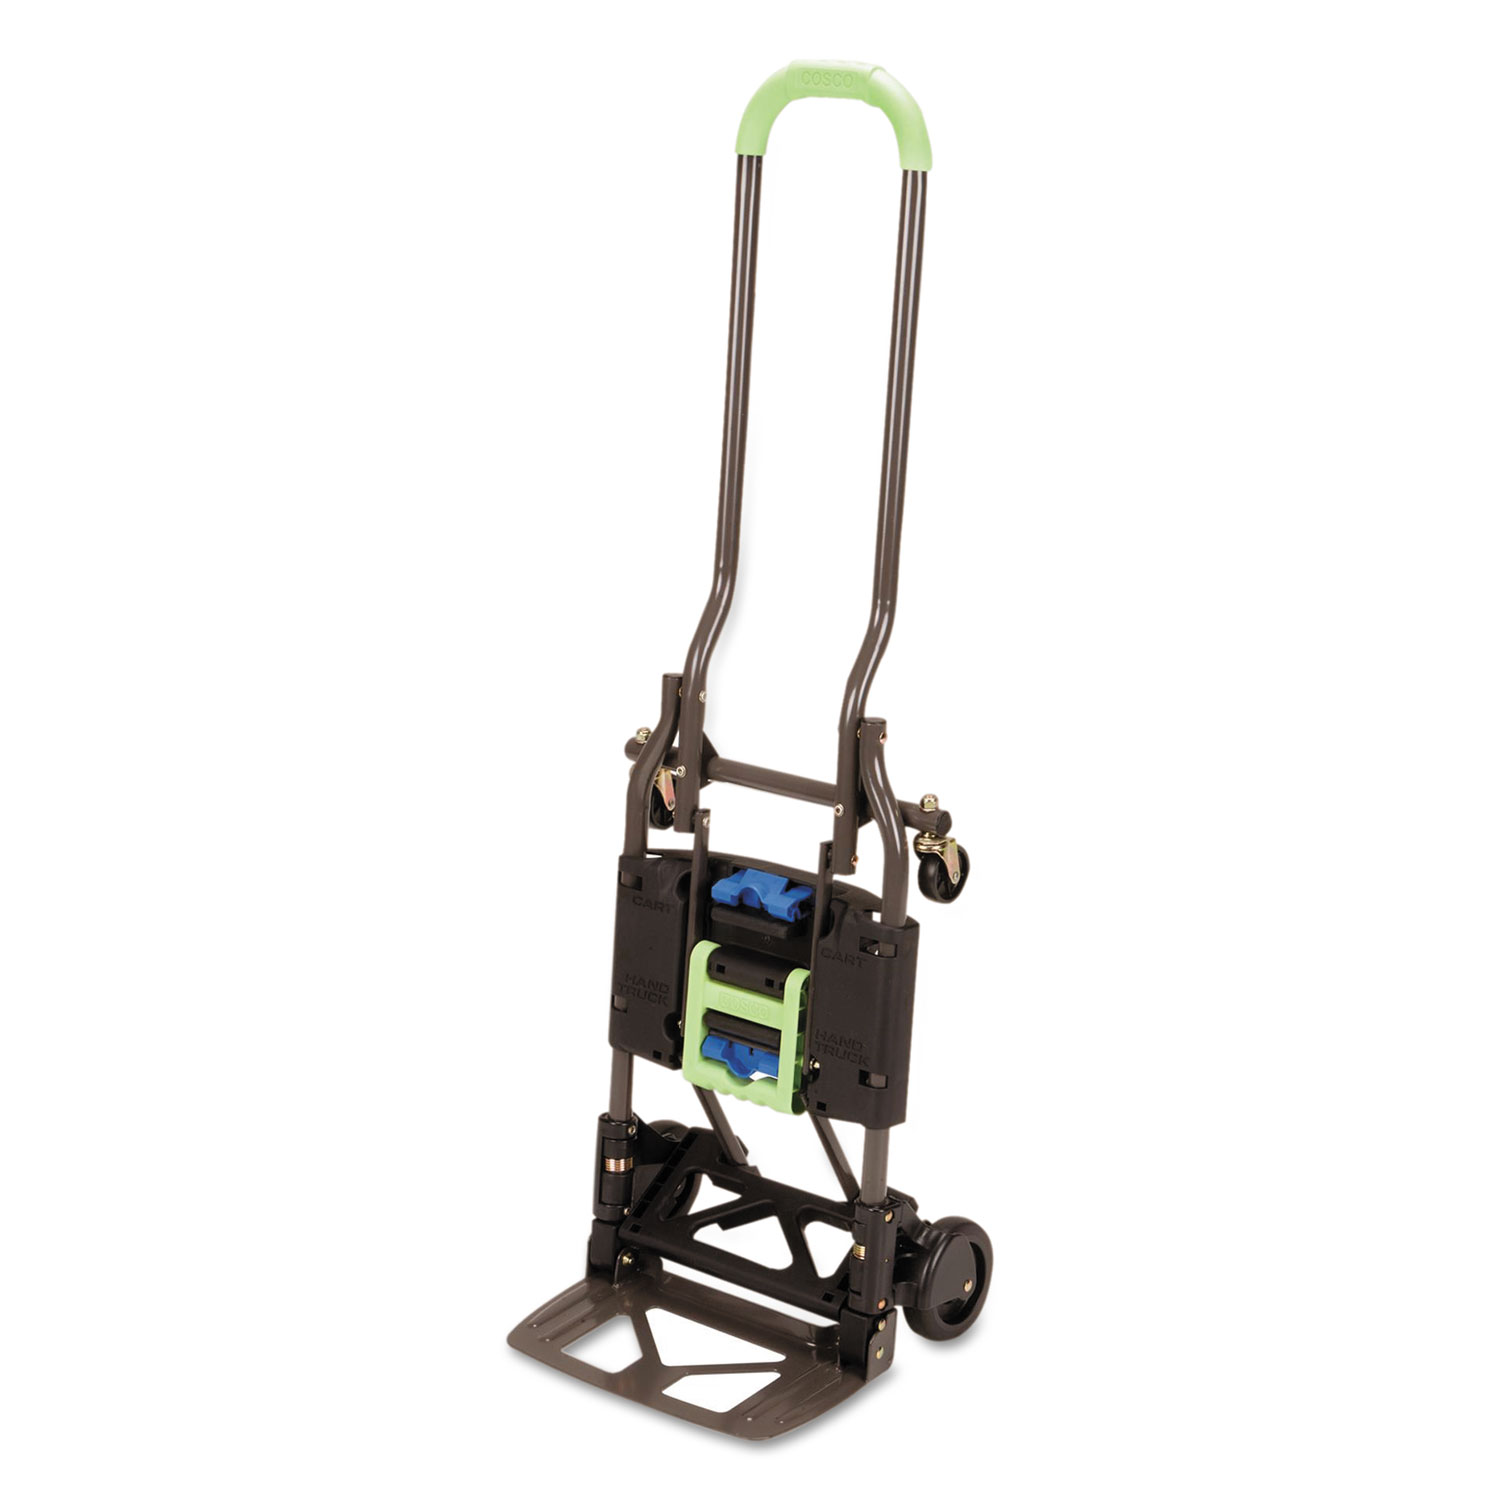 2-in-1 Multi-Position Hand Truck and Cart, 16 5/8 x 12 3/4 x 49 1/4, Blue/Green